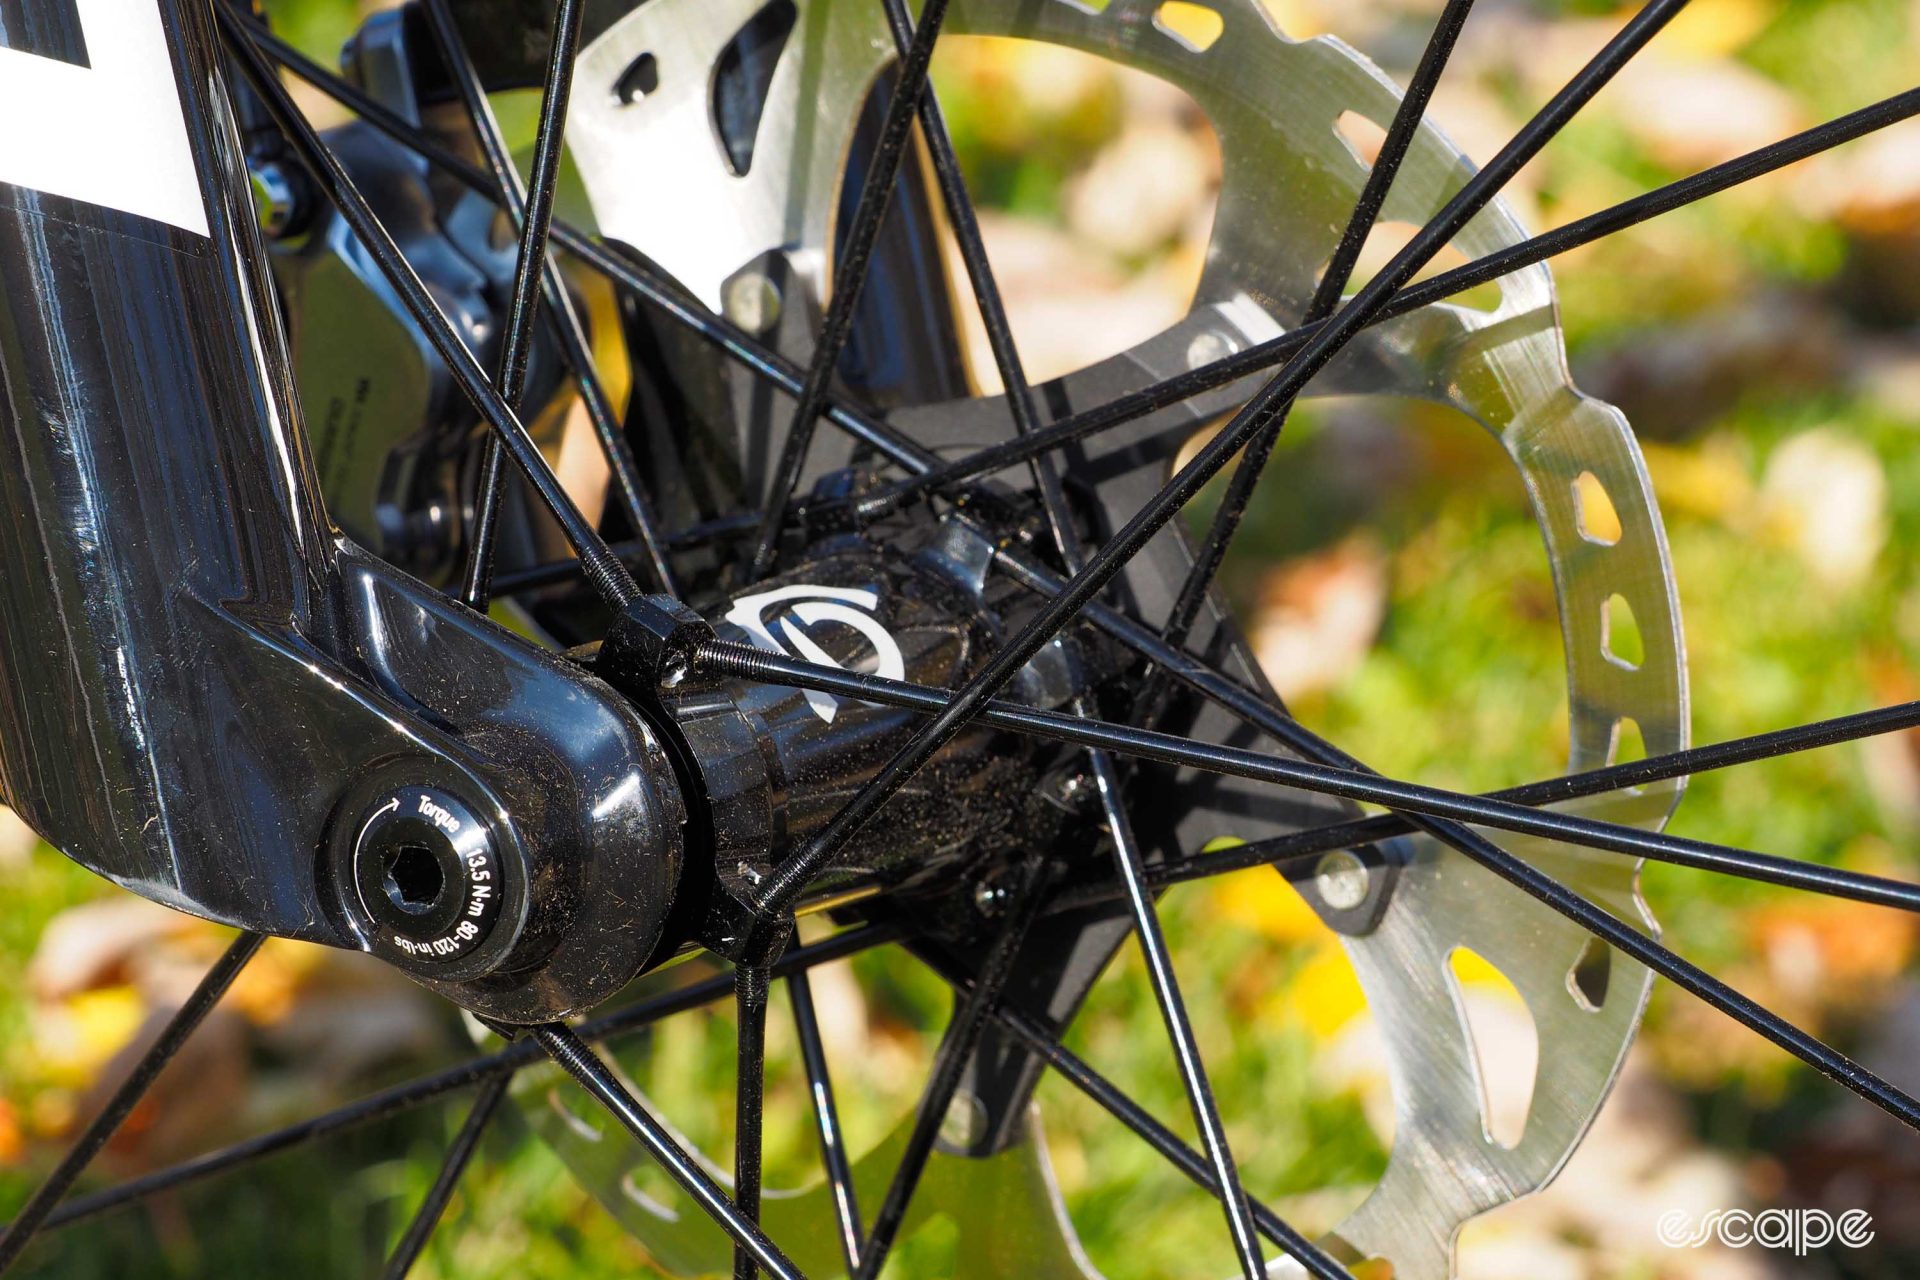 Industry Nine front hub with aluminum spokes